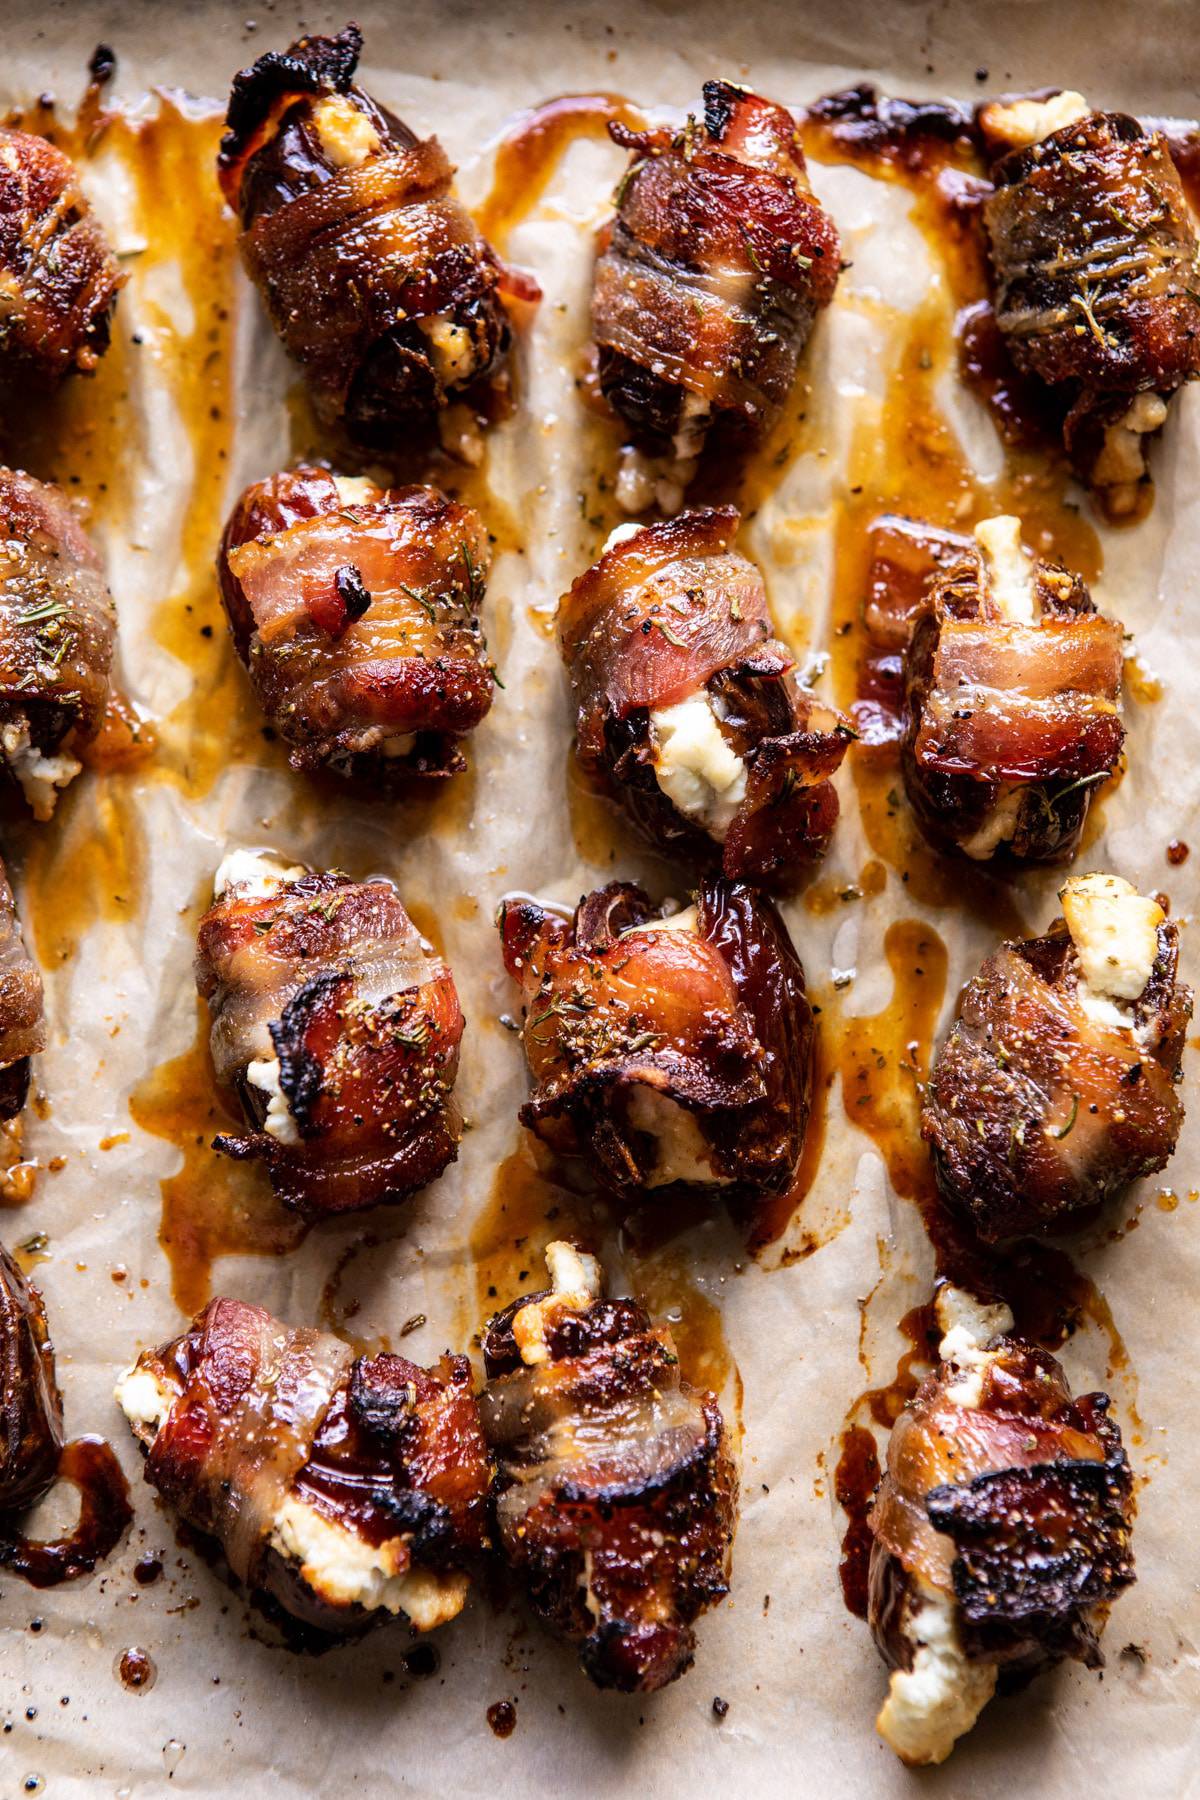 Goat Cheese Stuffed Bacon Wrapped Dates with Rosemary Honey | halfbakedharvest.com #dates #goatcheese #thanksgiving #appetizer